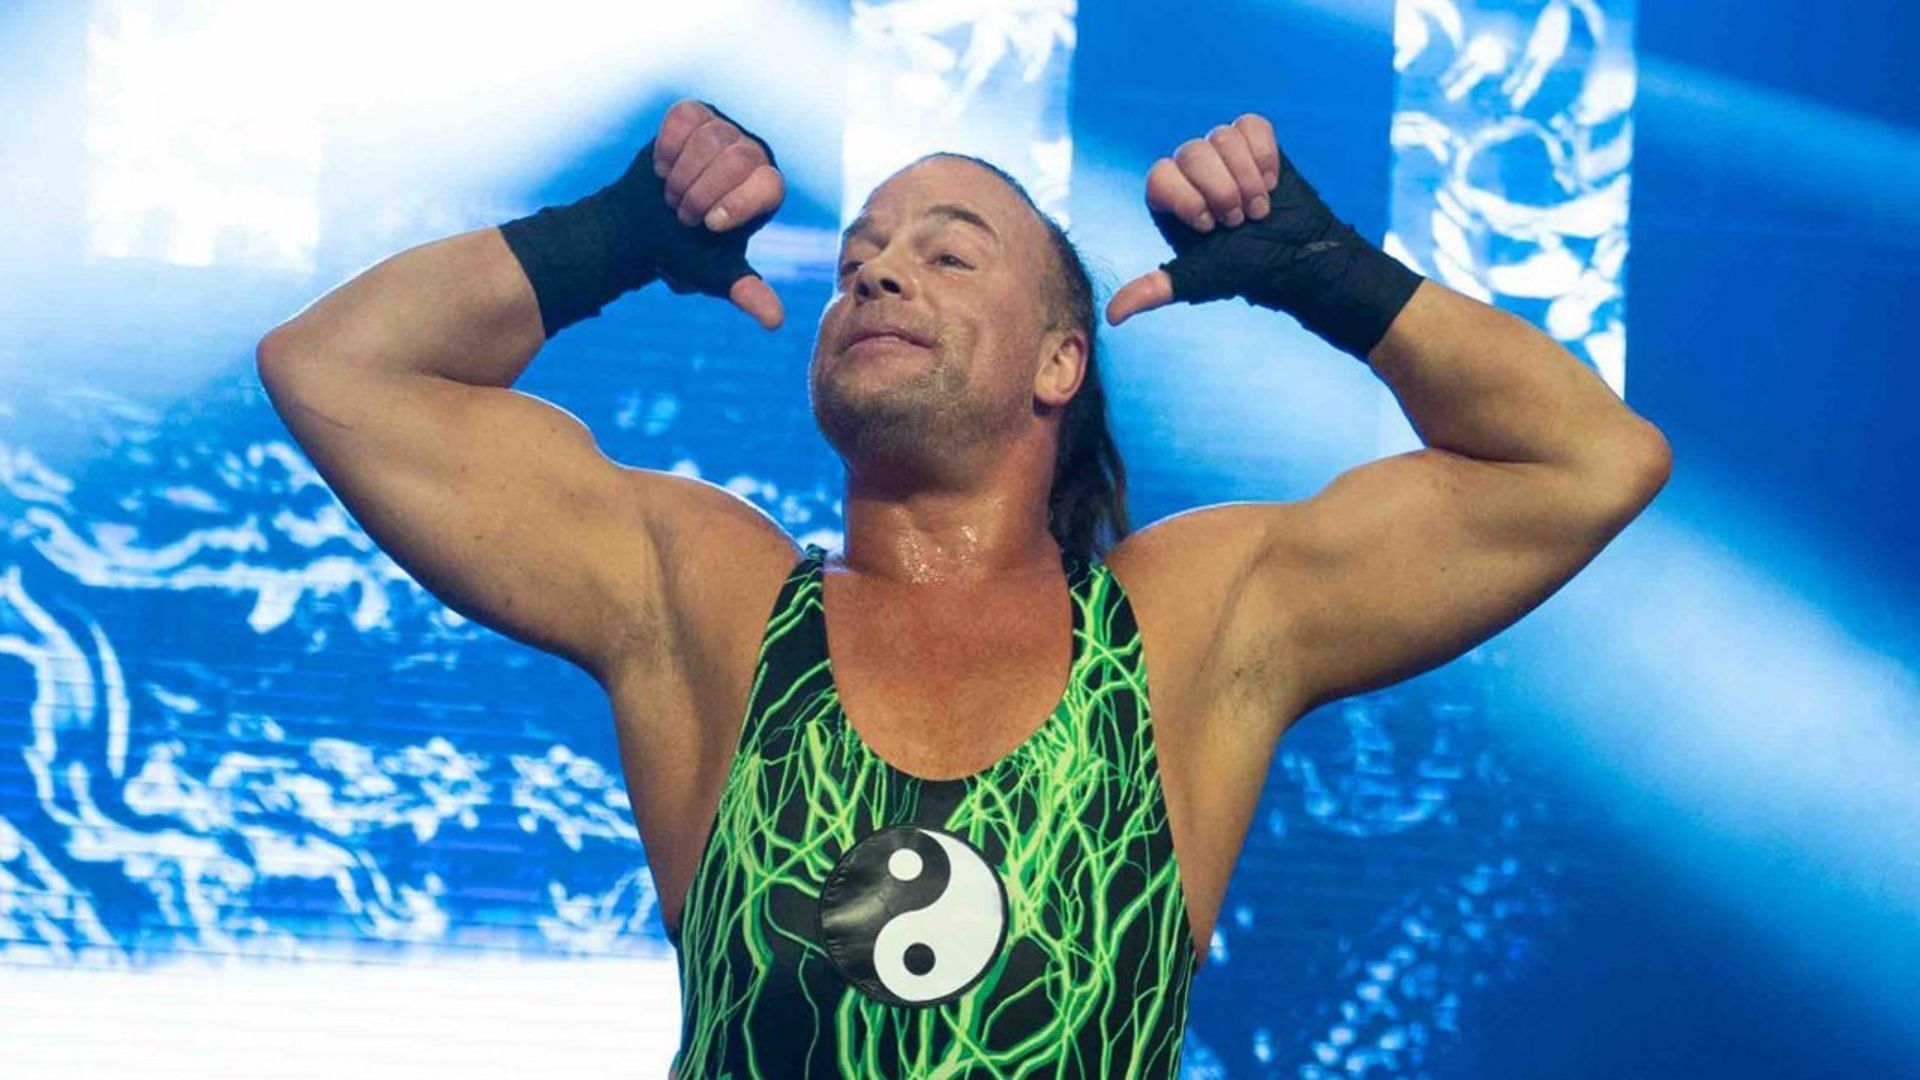 RVD has no regrets about insulting AEW many years ago